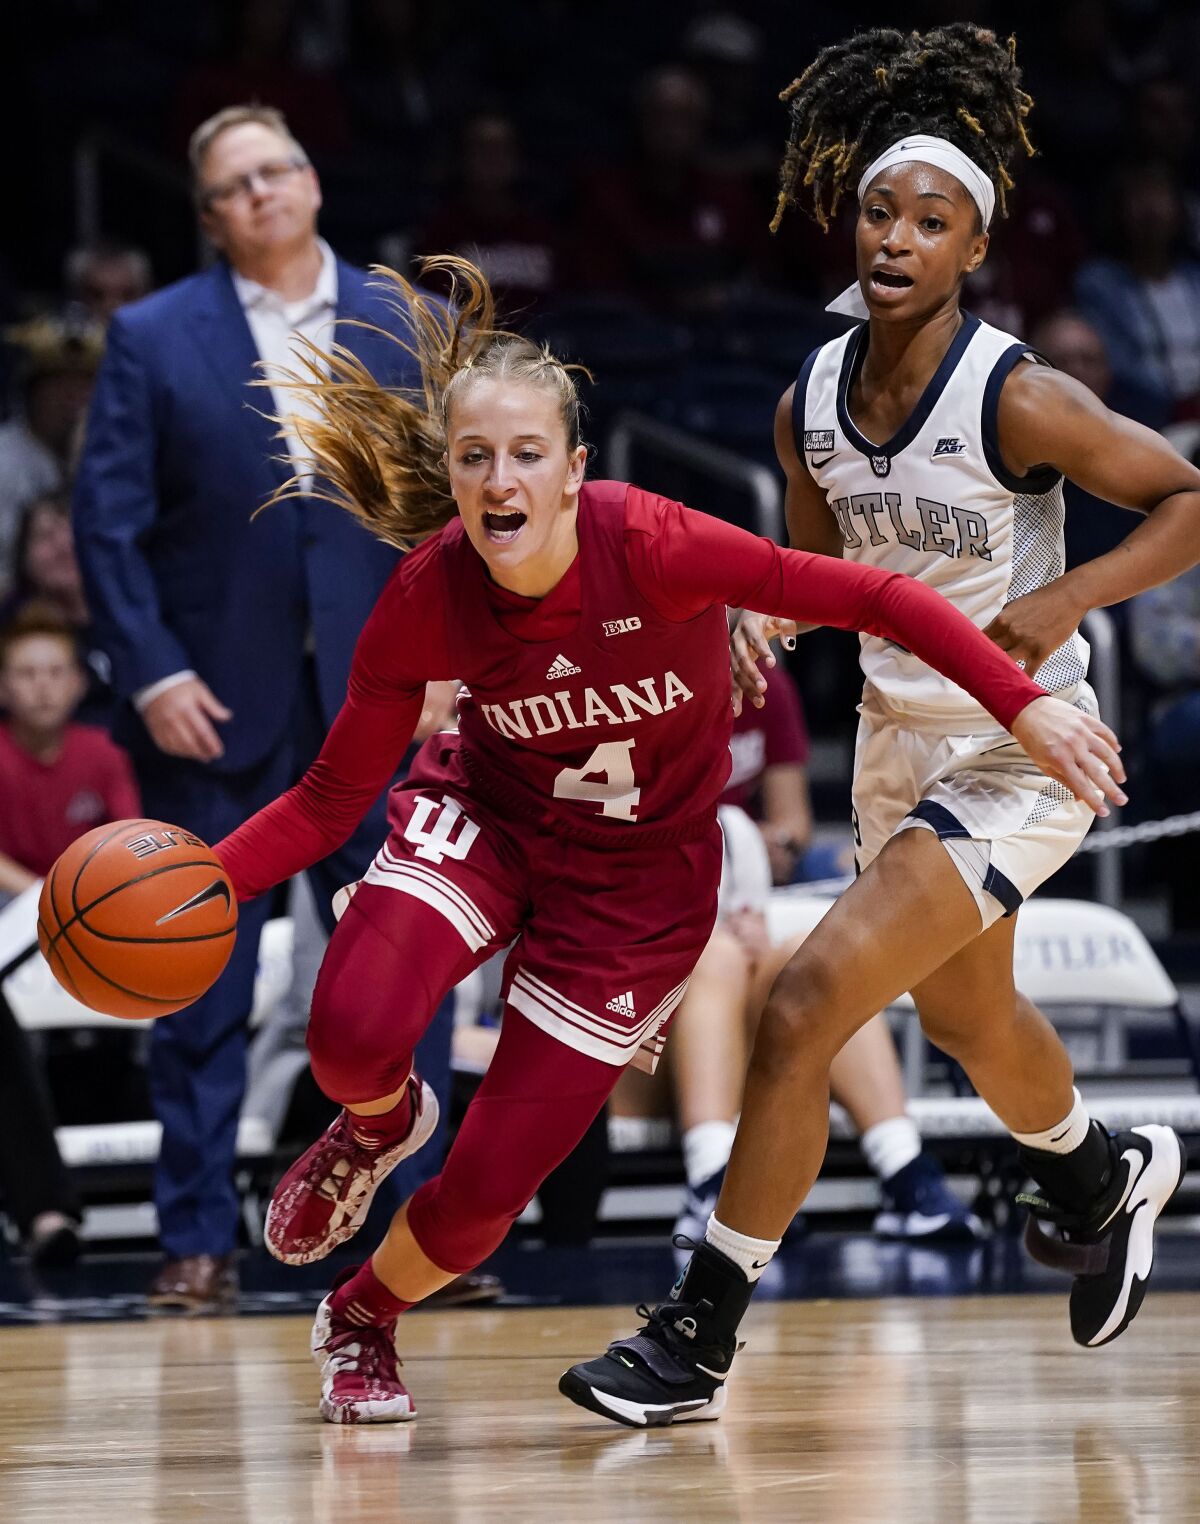 Indiana guard Nicole Cardano-Hillary (4) brings the ball up against Butler during an NCAA college basketball game Wednesday, Nov. 10, 2021, in Indianapolis. (Grace Hollars/The Indianapolis Star via AP)